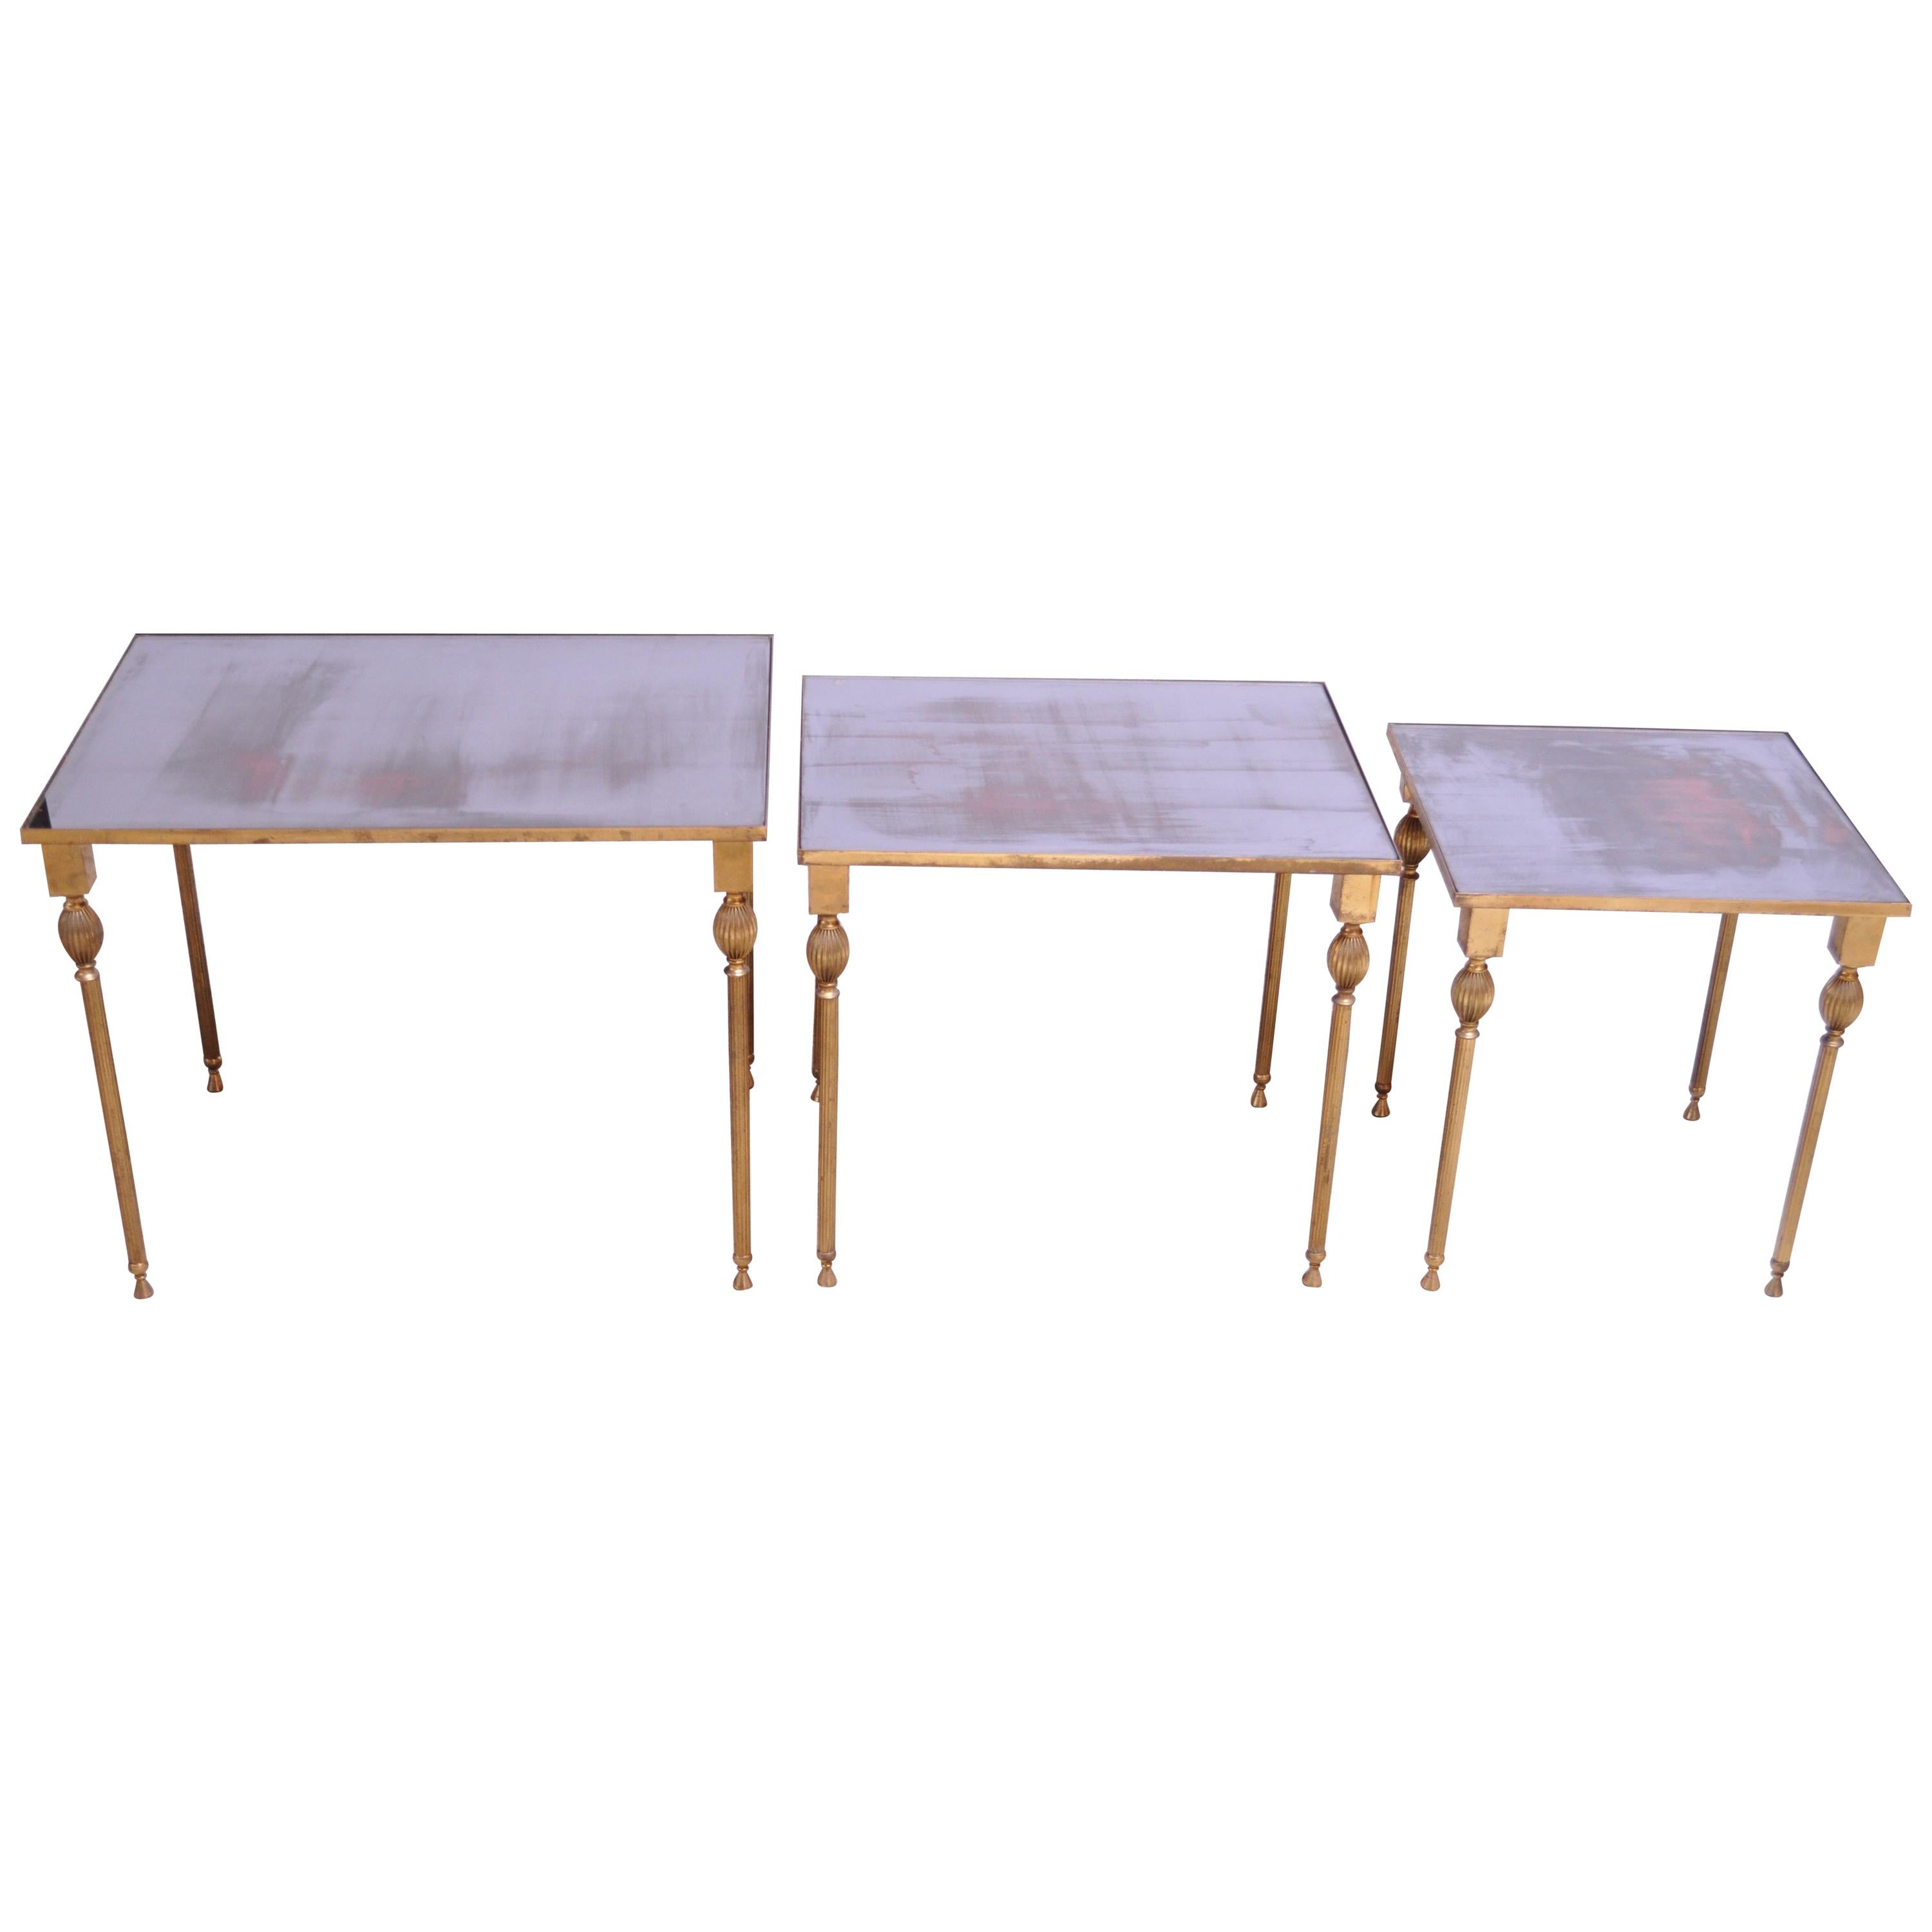 Neoclassical style brass nesting tables with inset antiqued-mirror glass tops. Beautifully thin, delicate legs with decorative finial details. Unique pattern / design to the mirror which appears to contains swaths of red and whose background color